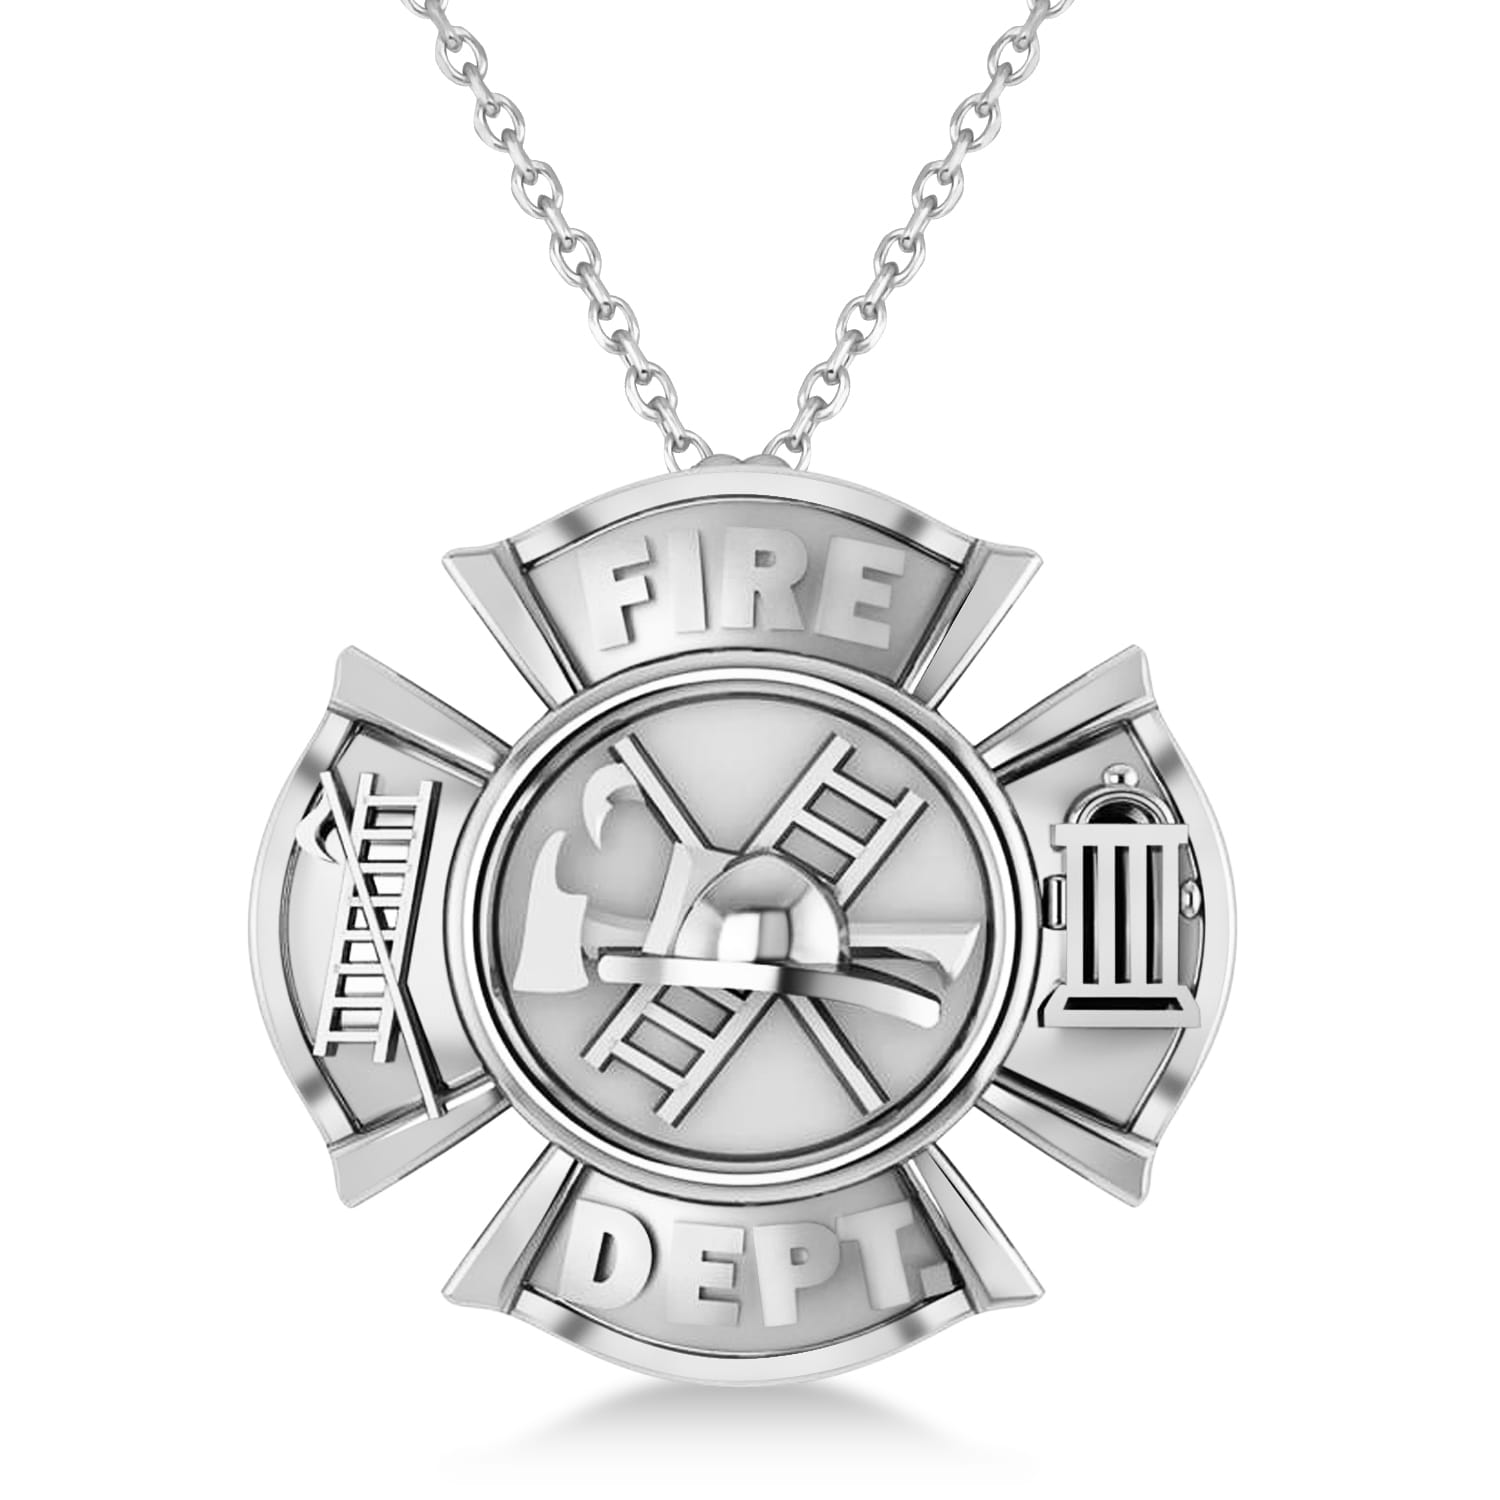 Fire Department Badge Pendant Necklace 14k White Gold